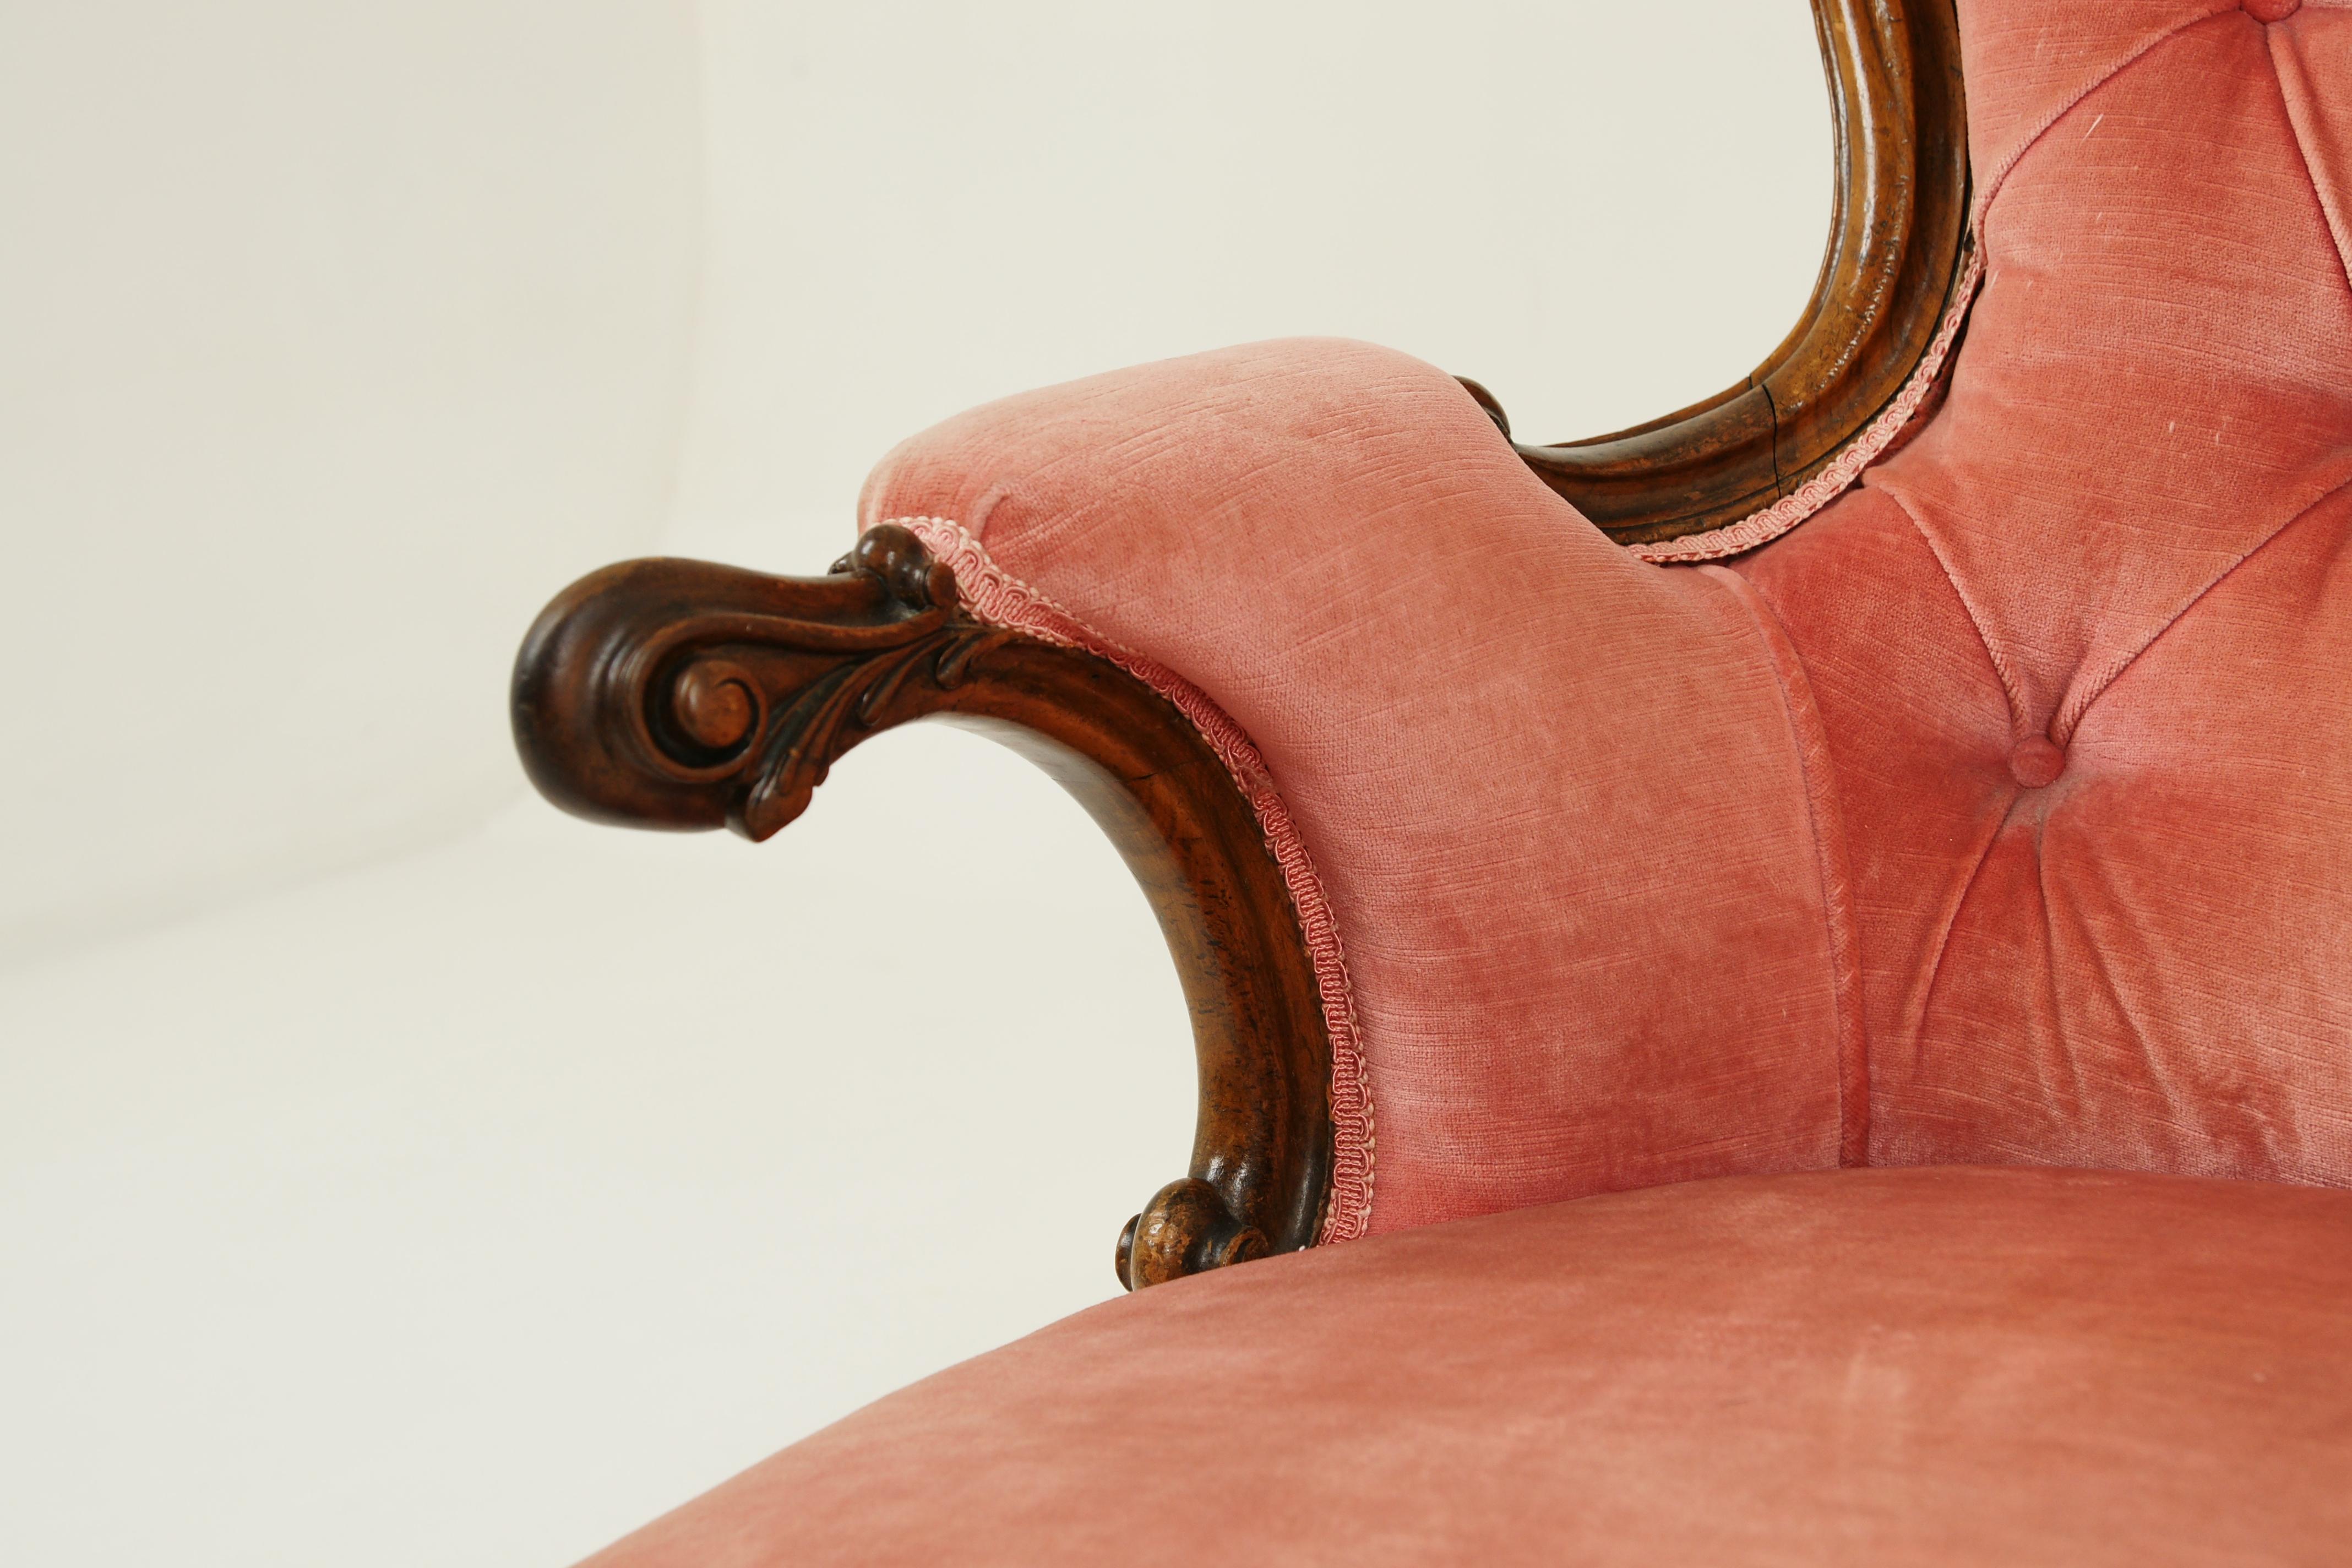 Antique armchair, button back chair, walnut, Victorian, Scotland, 1870, antique furniture

Scotland 1870
Solid walnut
Original finish
Carved detail to the top
Carved frame with button back upholstery
Shaped carved arms
Upholstered seat
Carved front